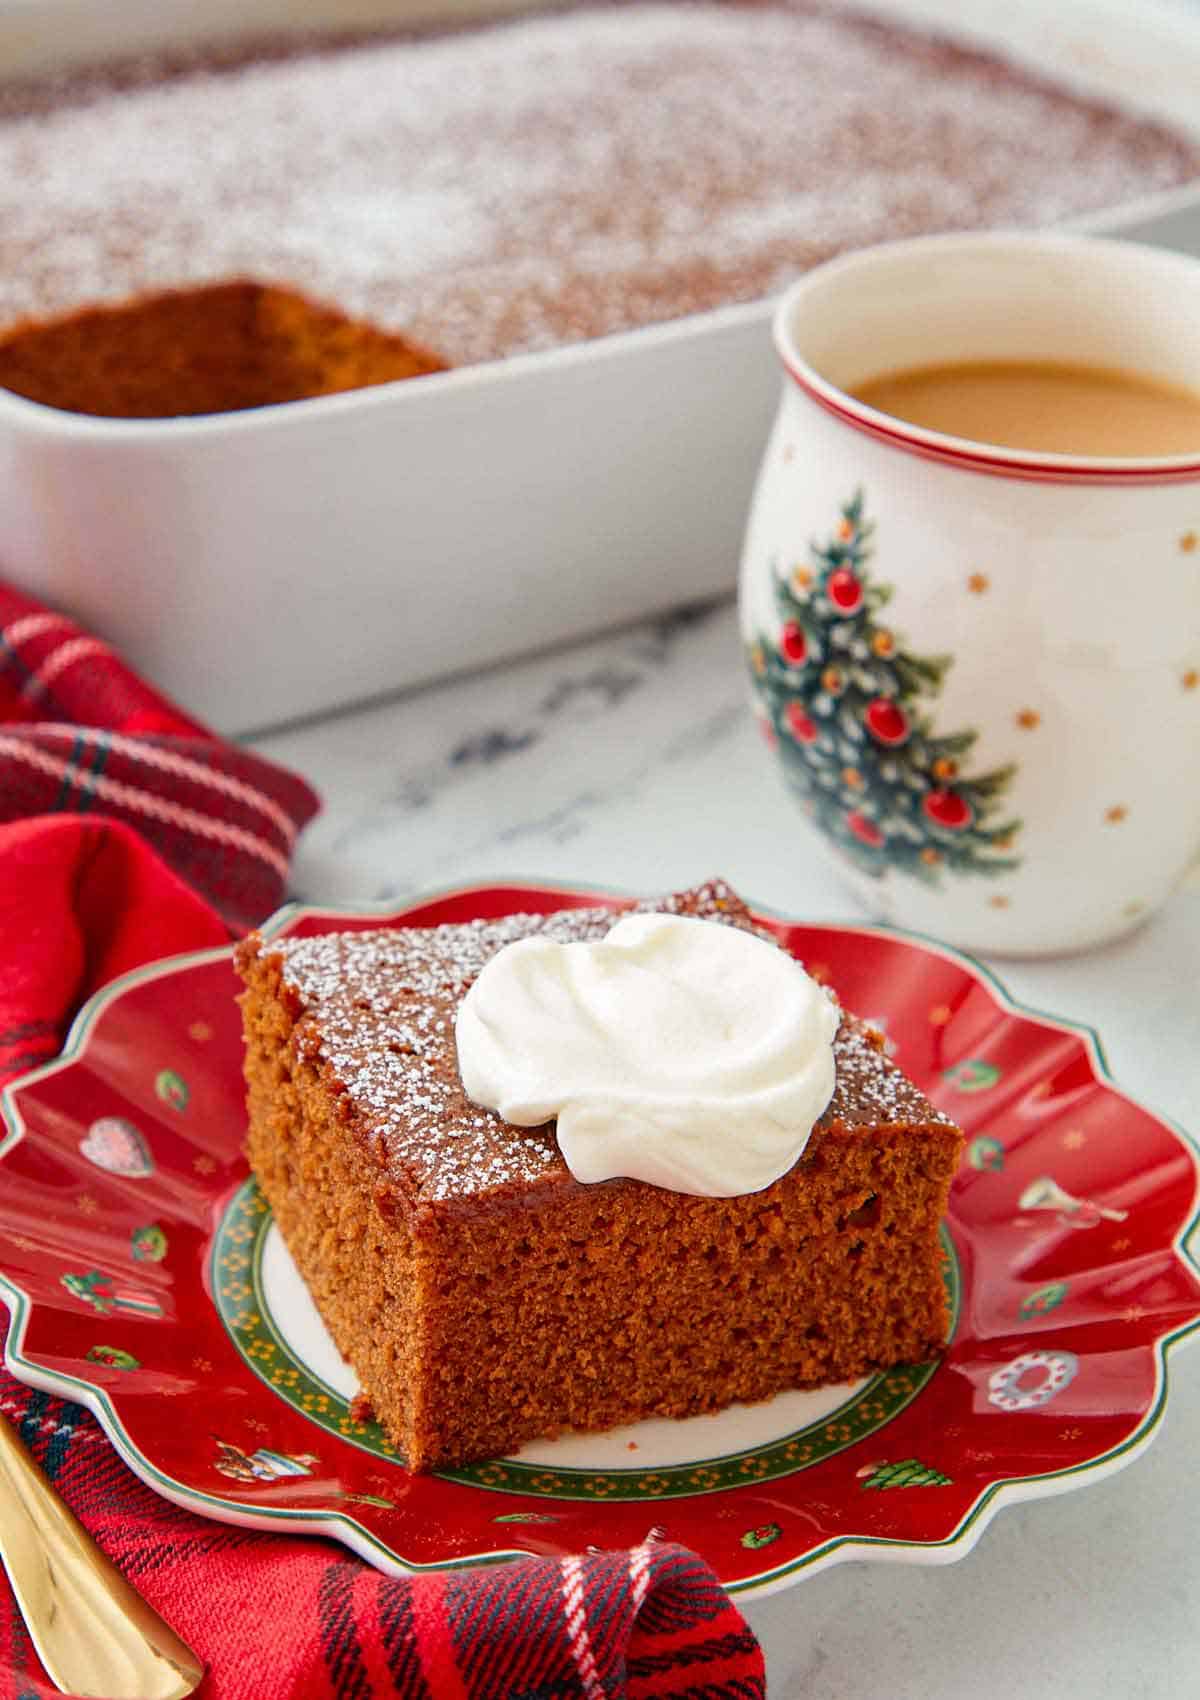 A festive red plate with a square slice of gingerbread cake with a dollop of whipped cream on top with a cup of coffee and the rest of the cake in the background.